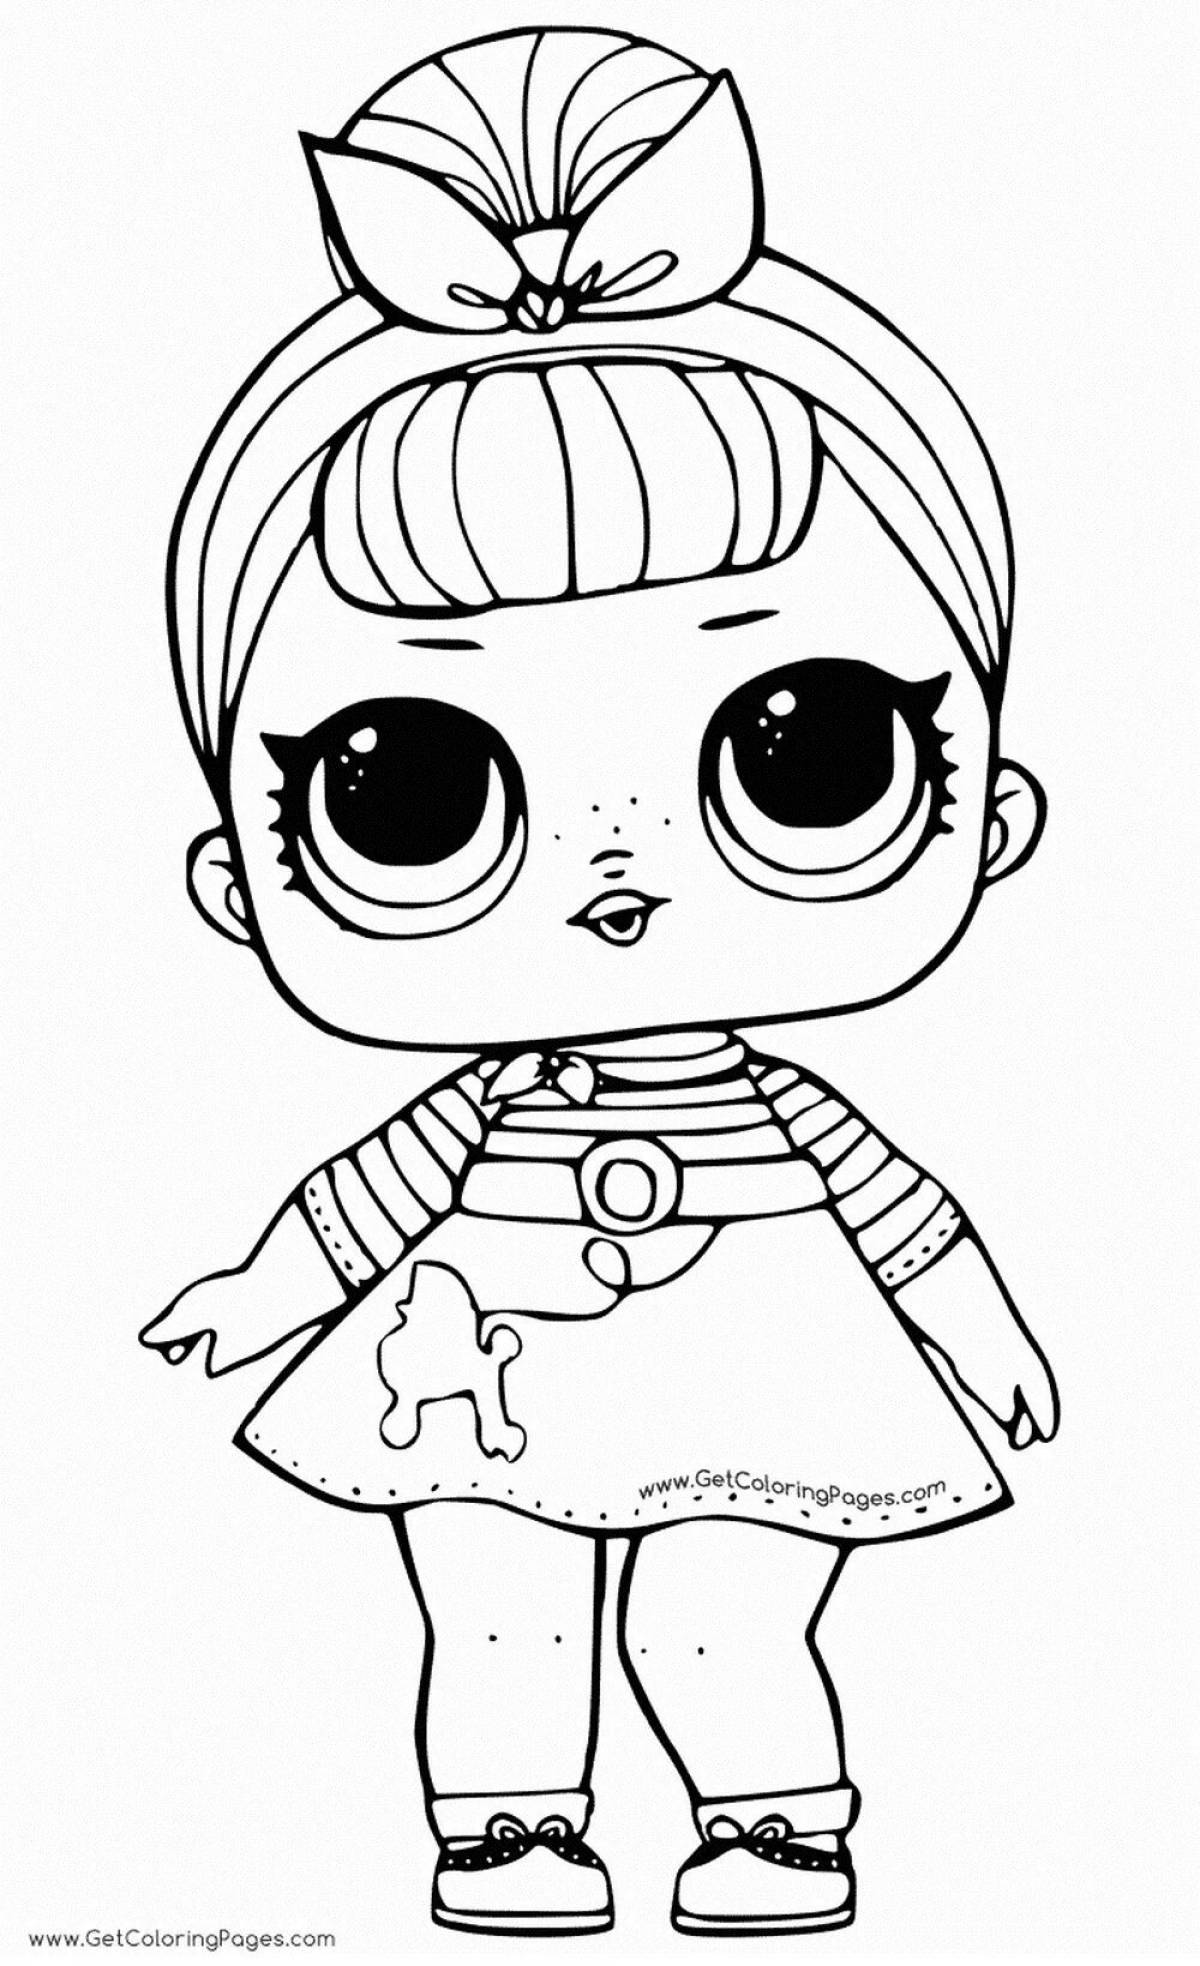 Live coloring for girls doll lola